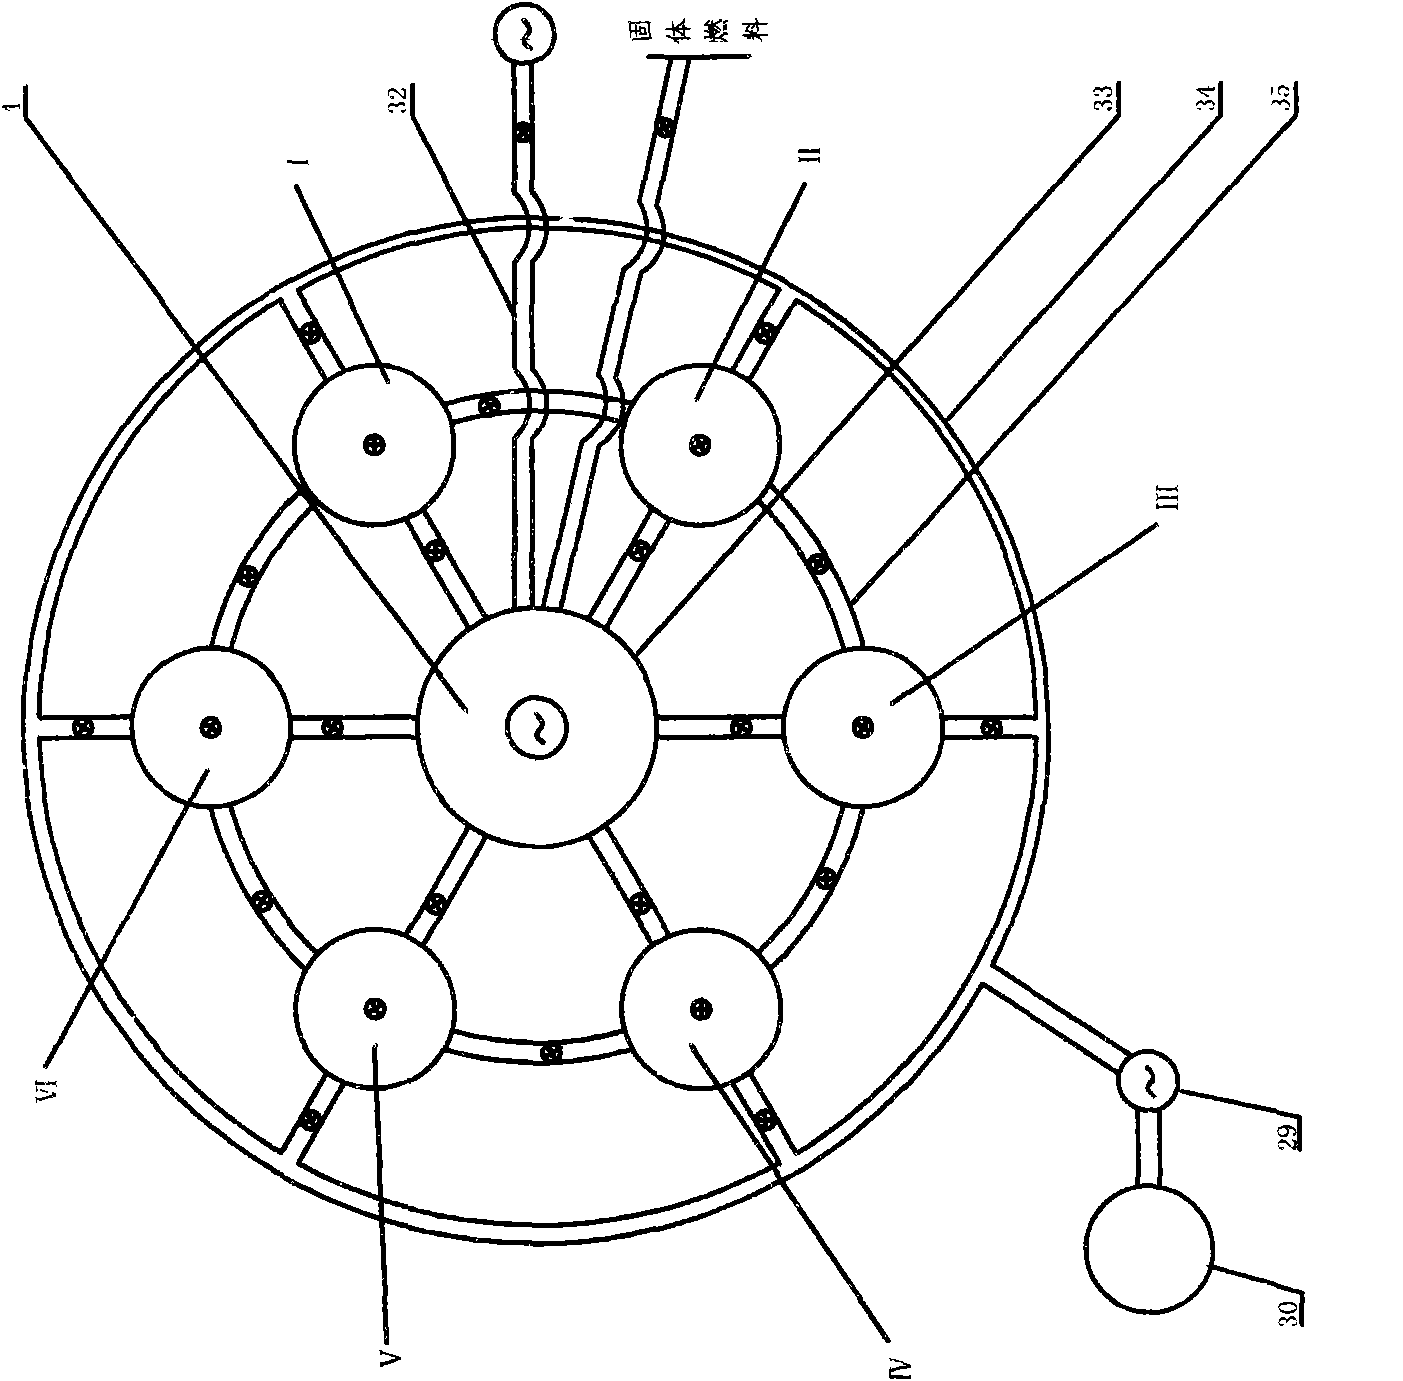 Method and device for sintering lime